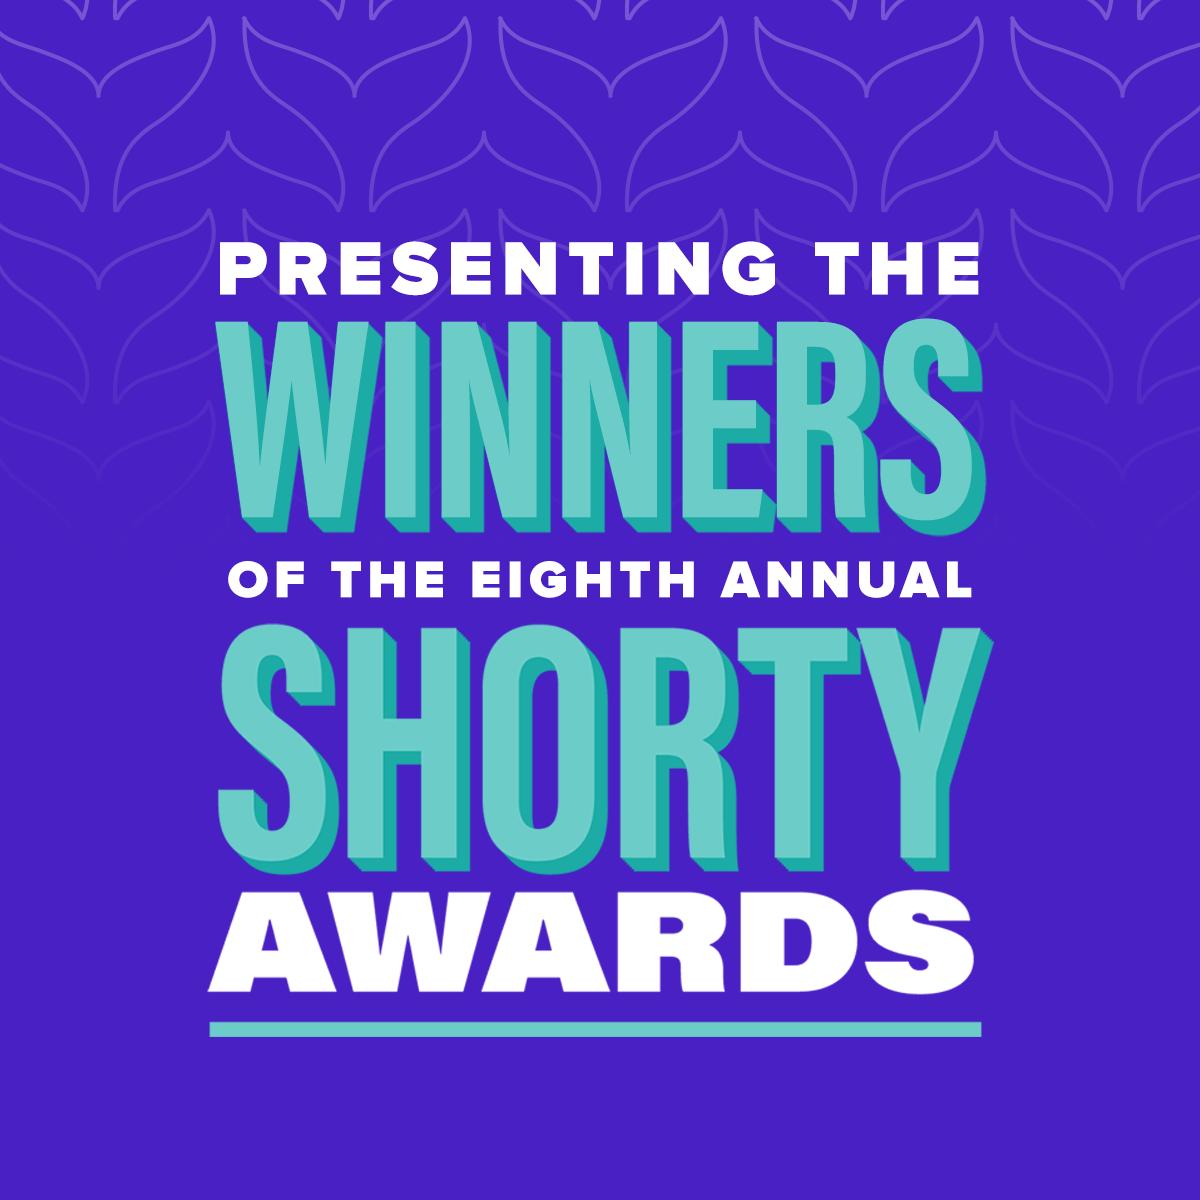 And the winners in the 8th Annual Shorty Awards are… Shorty Awards Blog